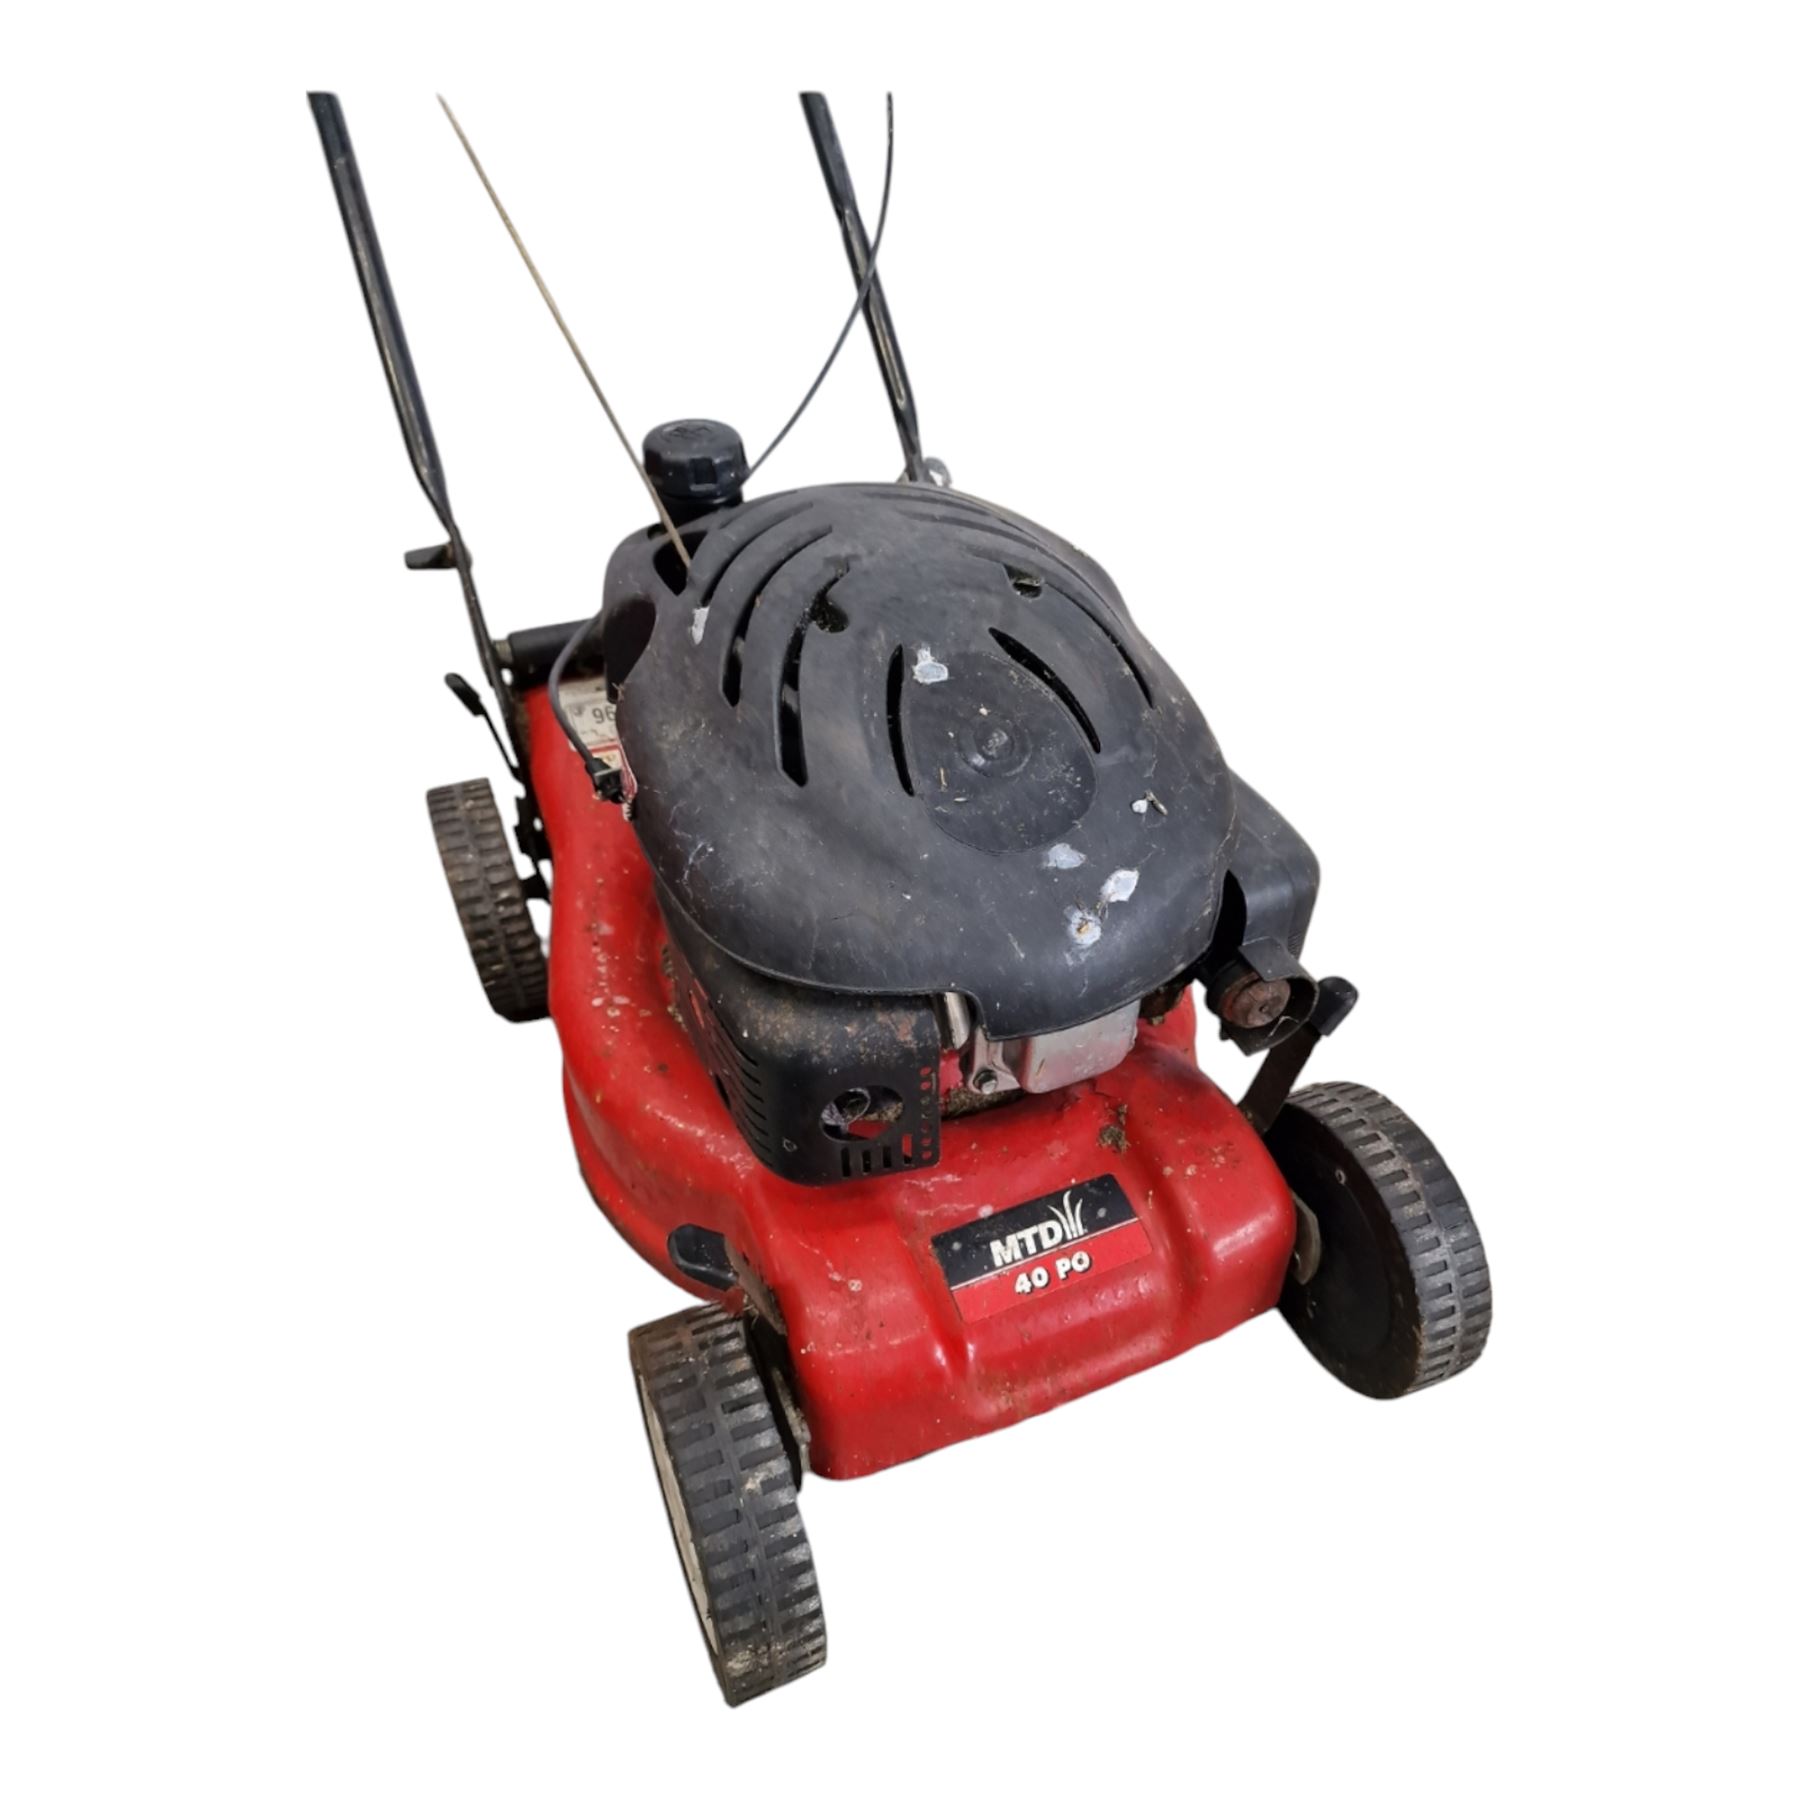 Cylinder Petrol 17s and MDT 40 PO lawnmowers - Image 5 of 5